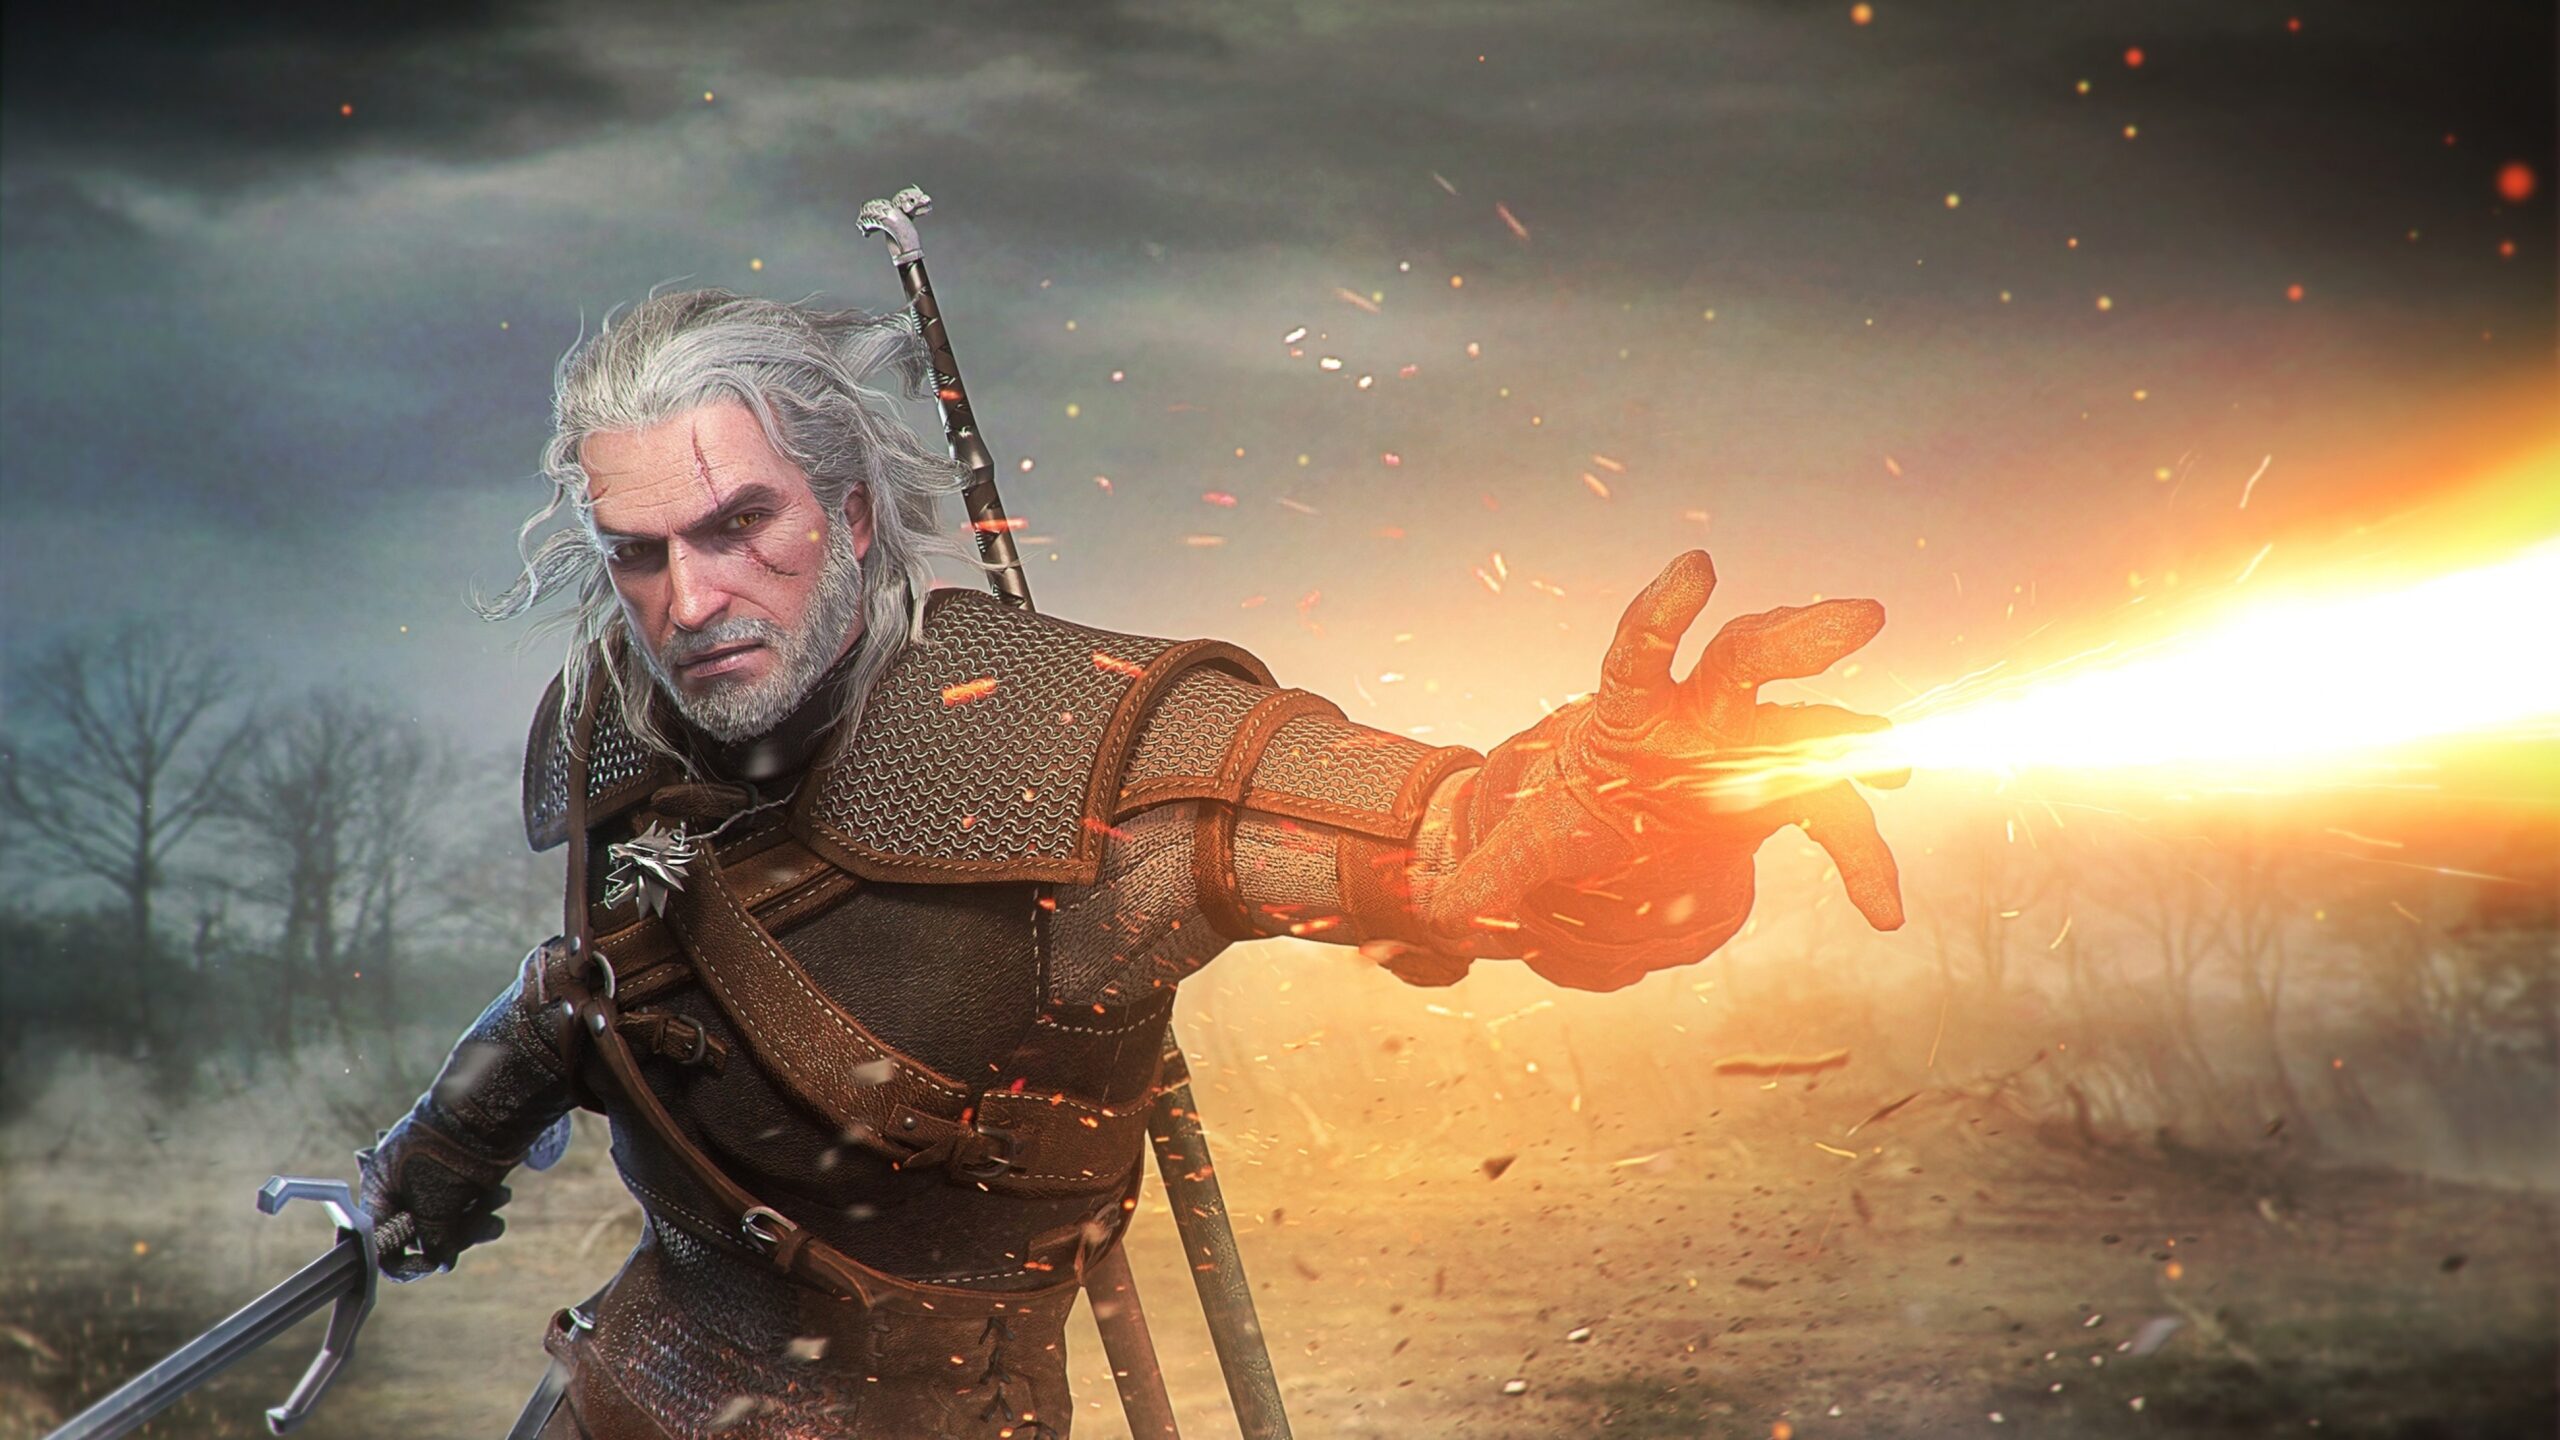 The Witcher 3: Wild Hunt – is this OST perfect?